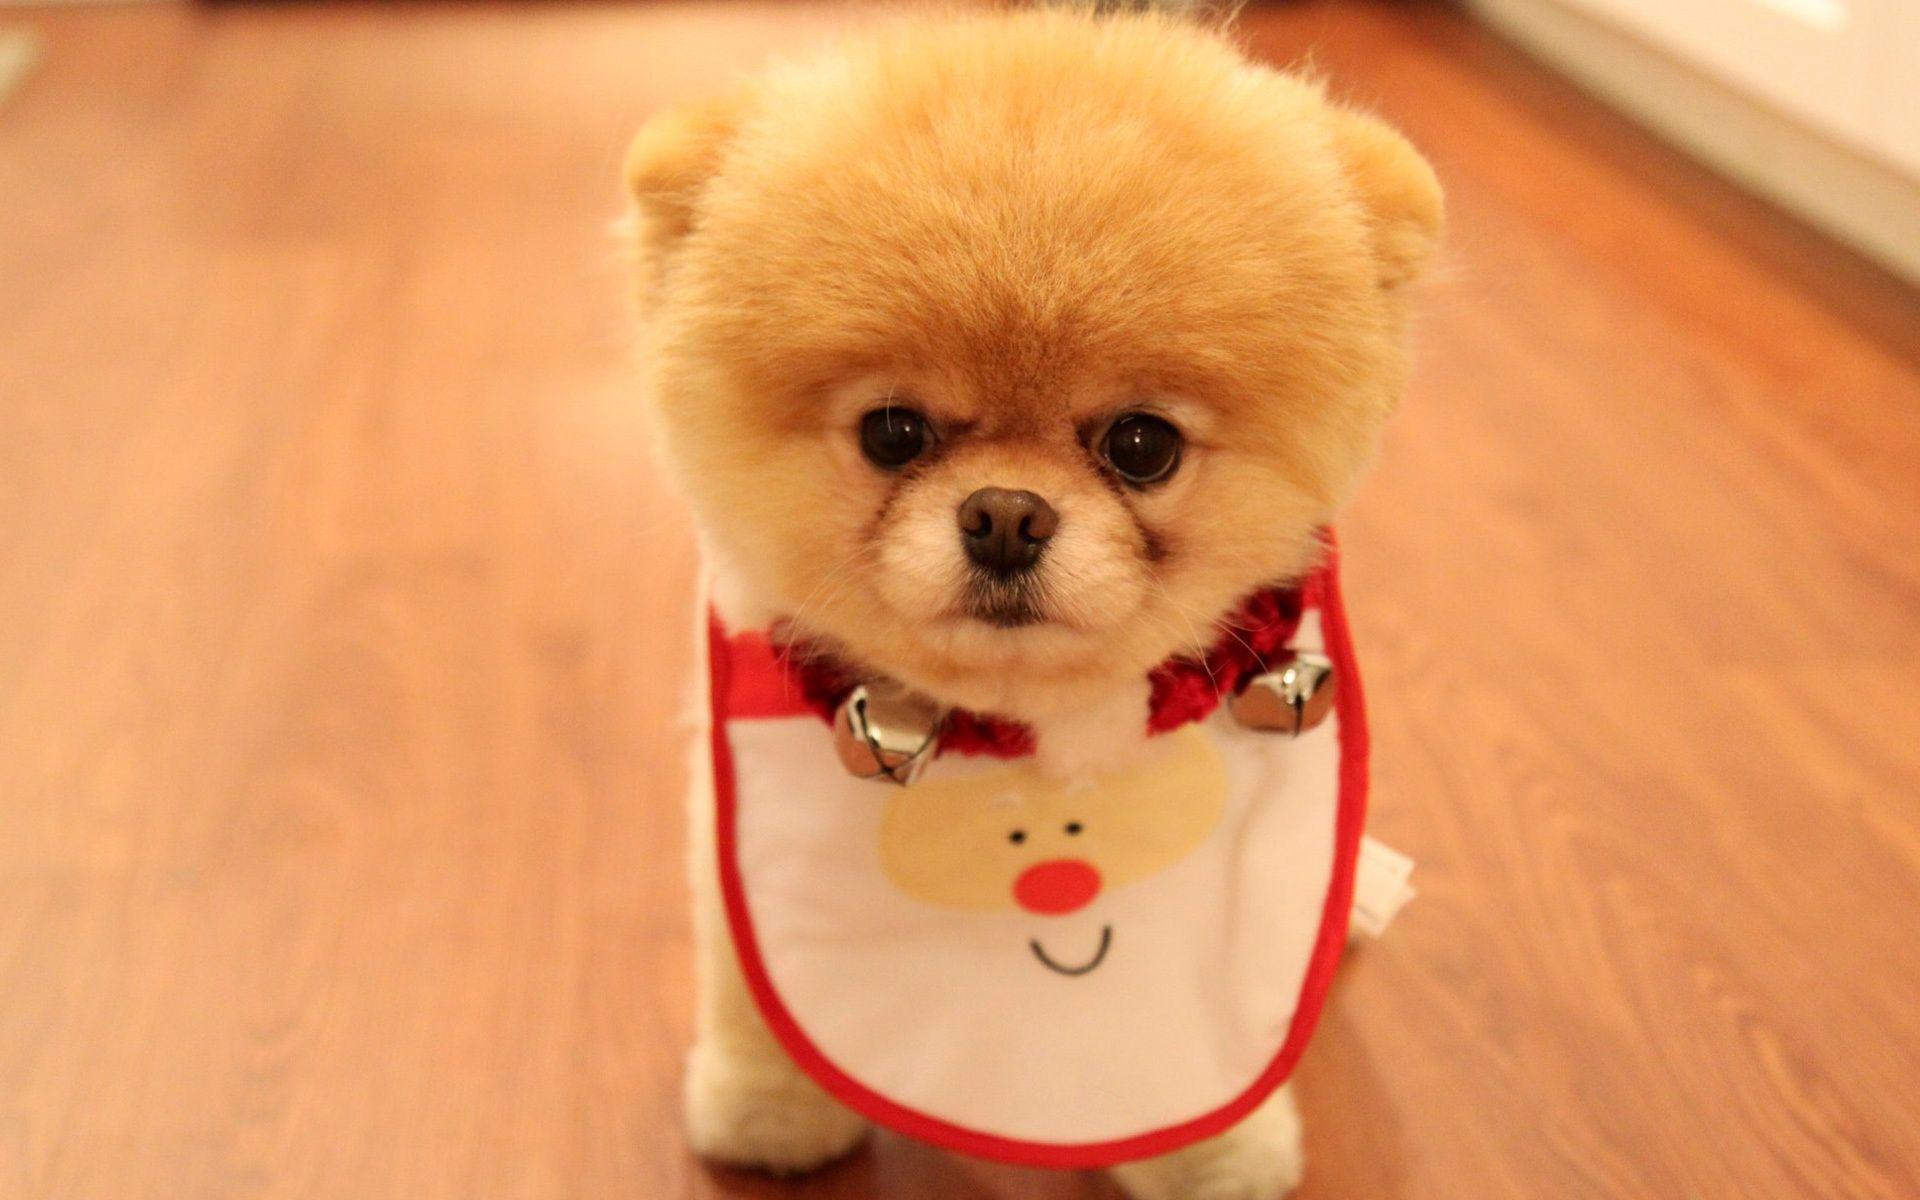 Cute Dog Christmas Wallpaper in jpg format for free download